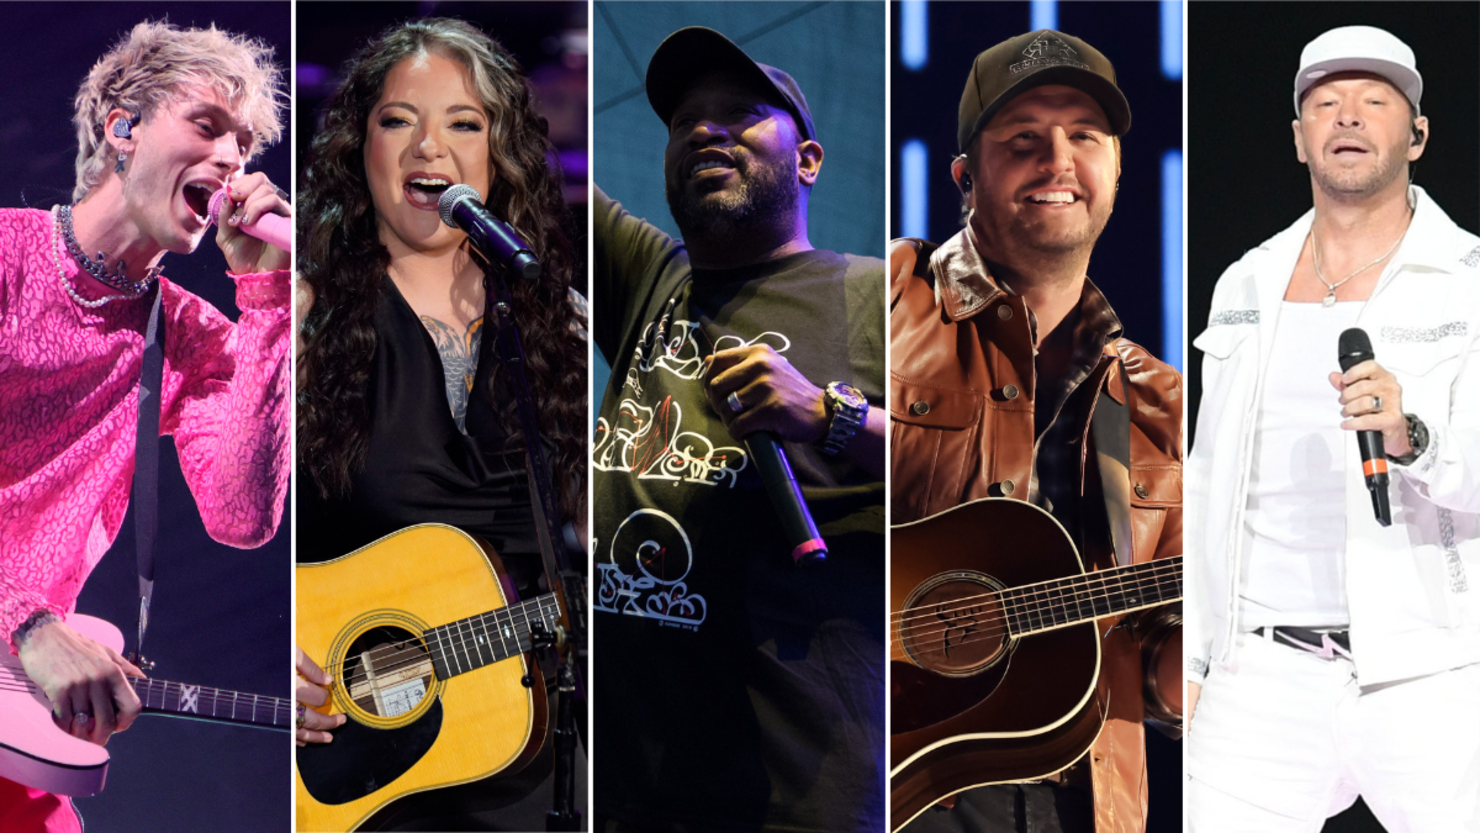 The Houston Rodeo Concert Lineup Is Finally Here & It’s Epic! iHeart